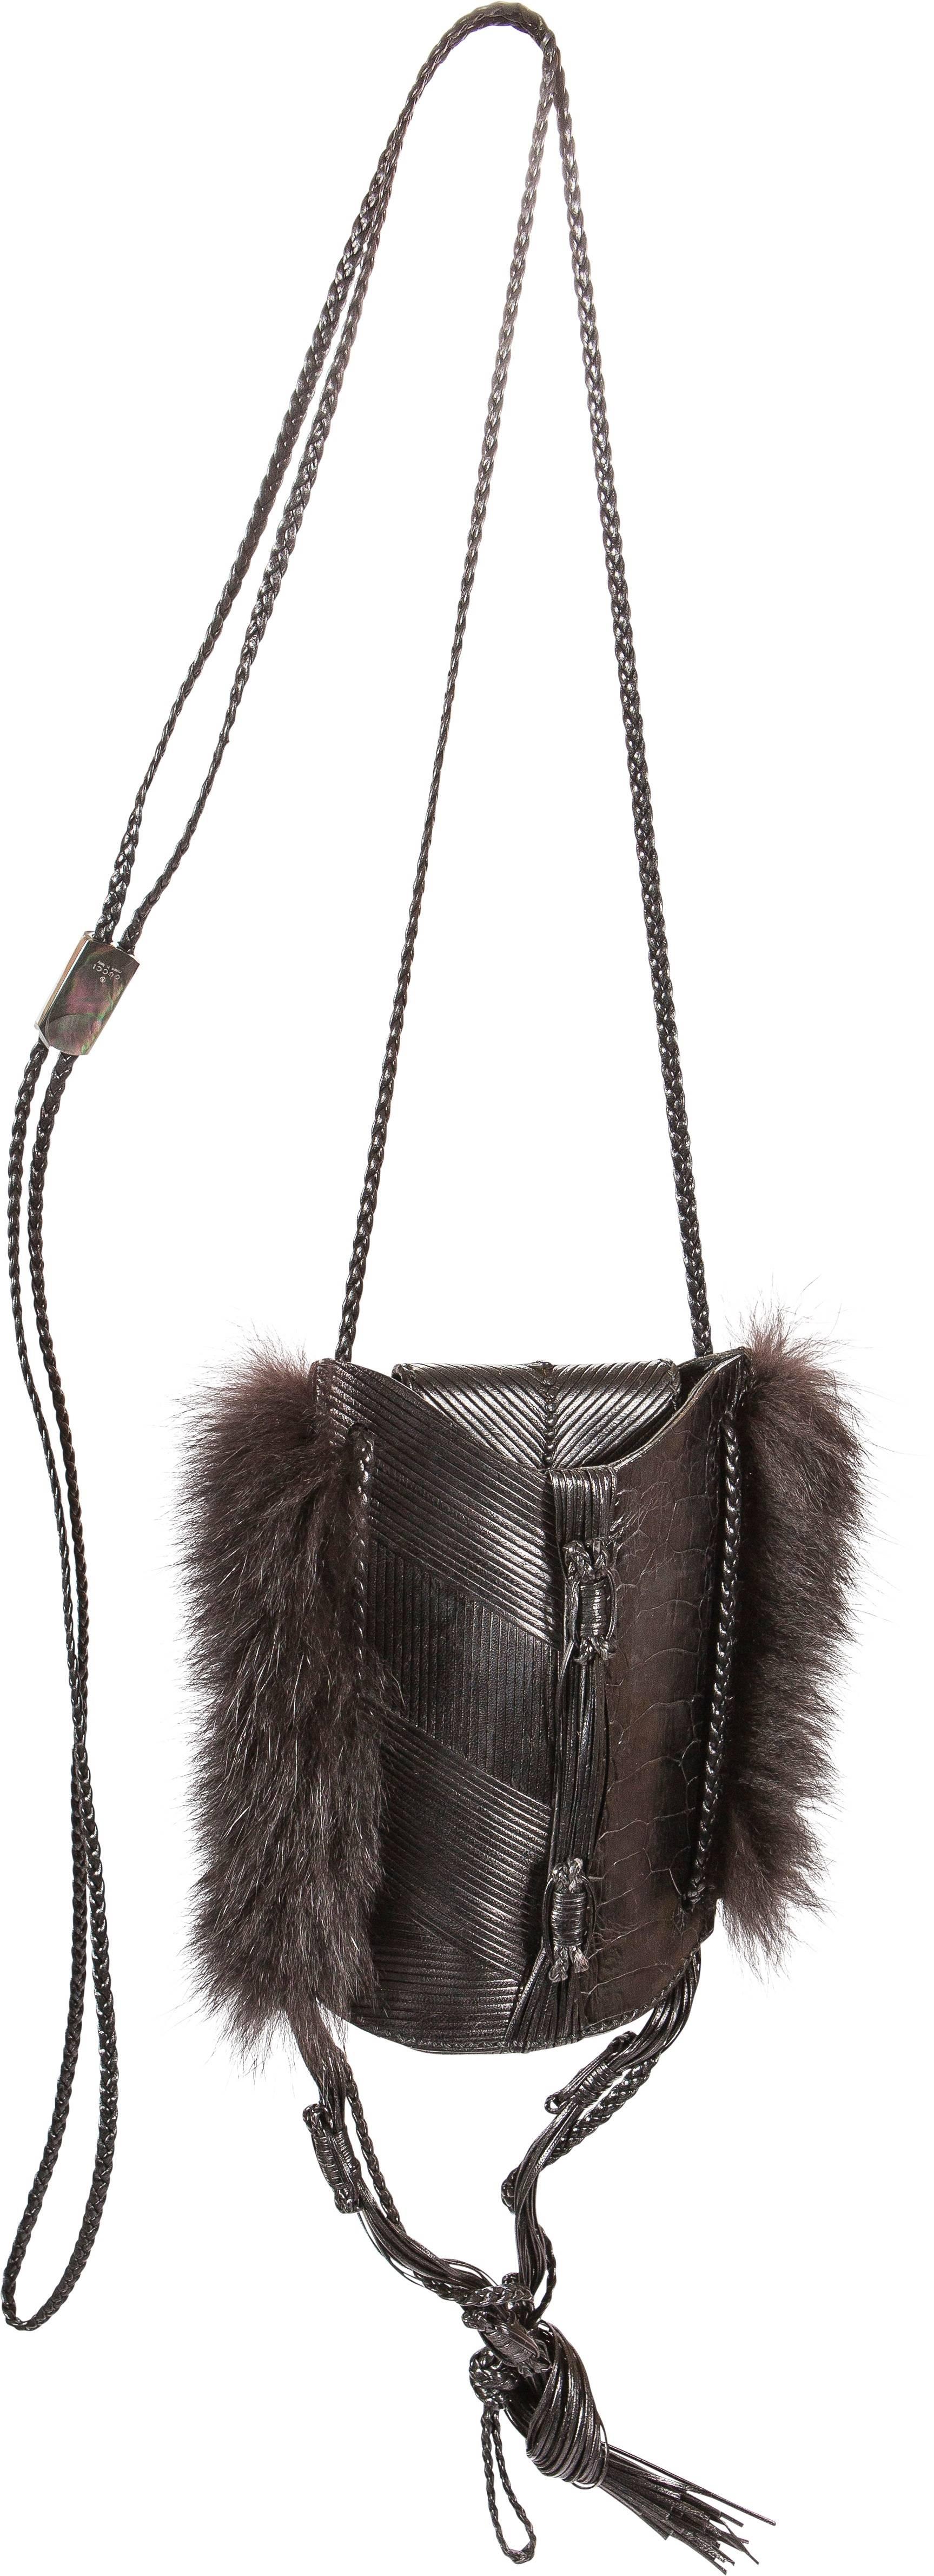 Tom Ford for Gucci Fall 2002 
Alligator & Mink Inro with Leather Straps
Highly Collectable